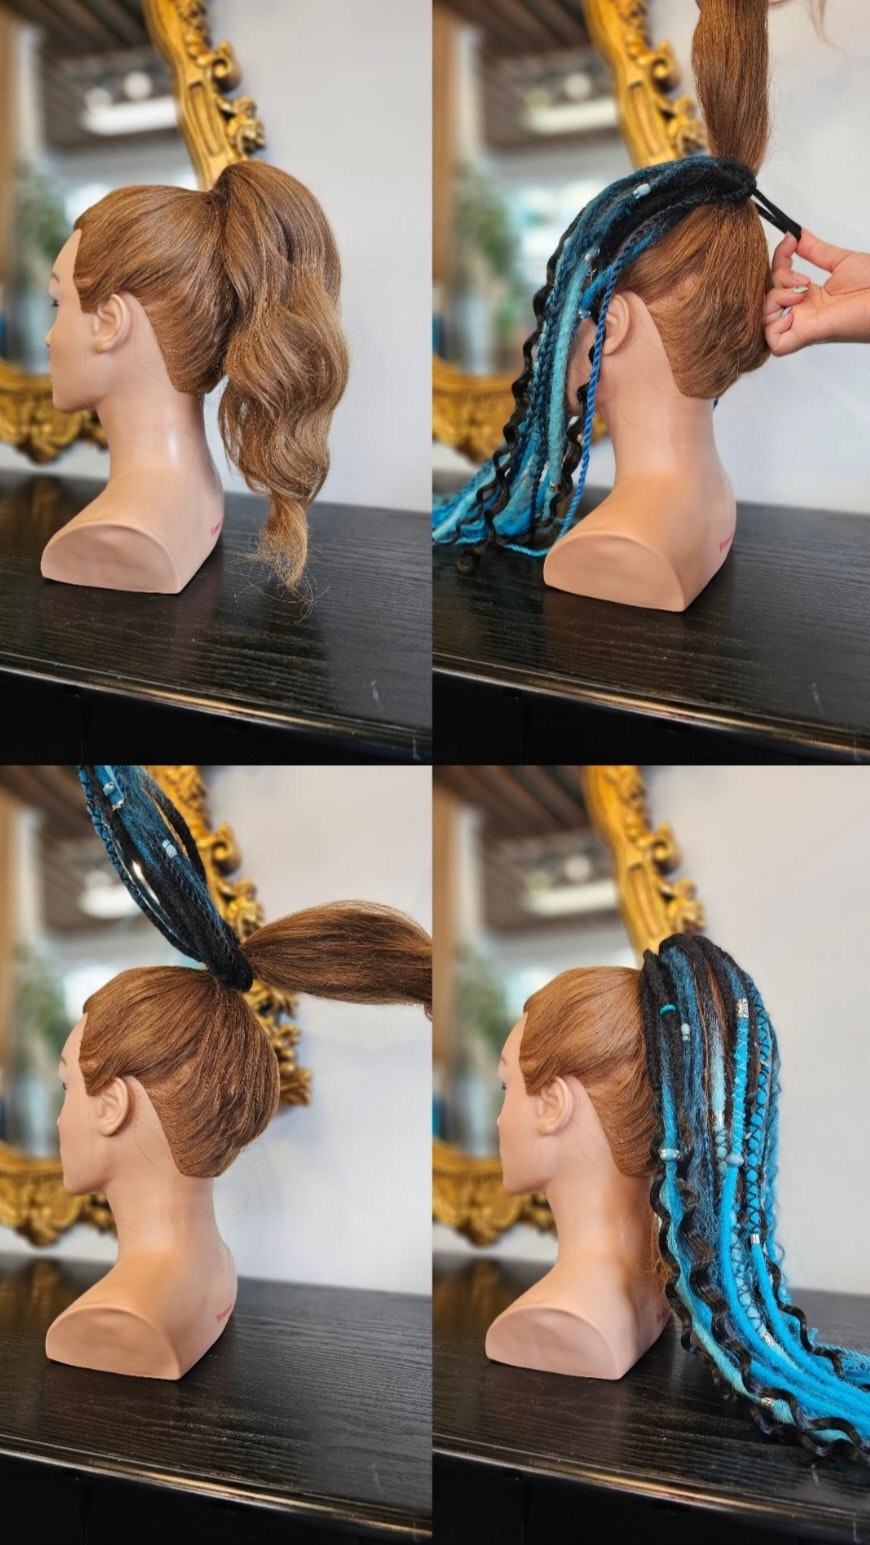 "Havsnymf" Dreads Ponytail Extensions